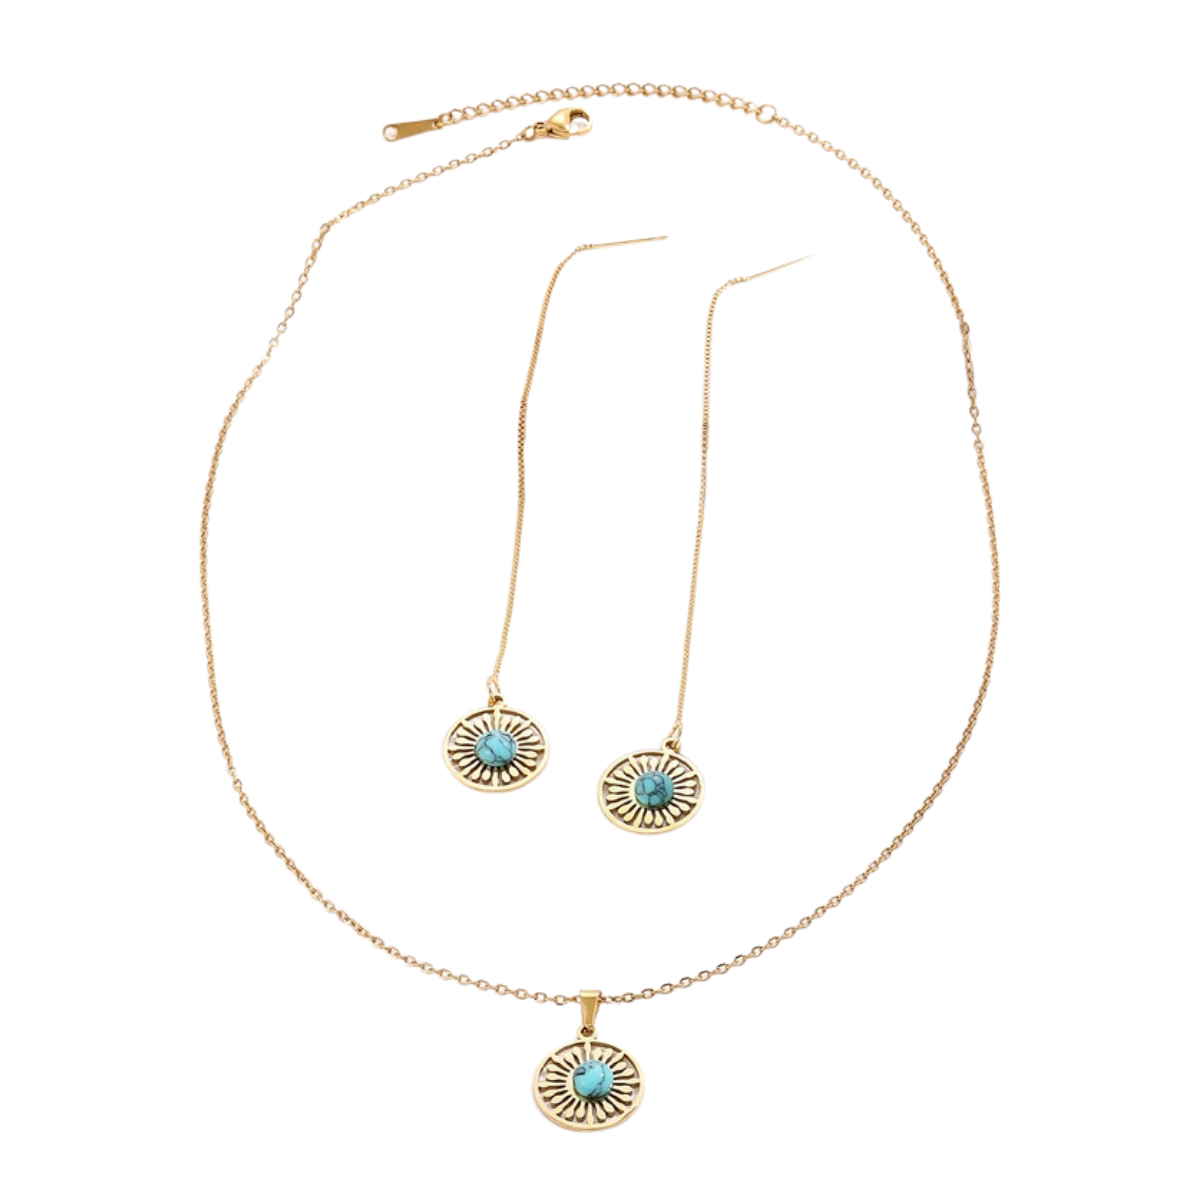 10pcs - Natural Turquoise Stone Gold Tone Round Necklace and Earrings Set|GCJ419|UK seller